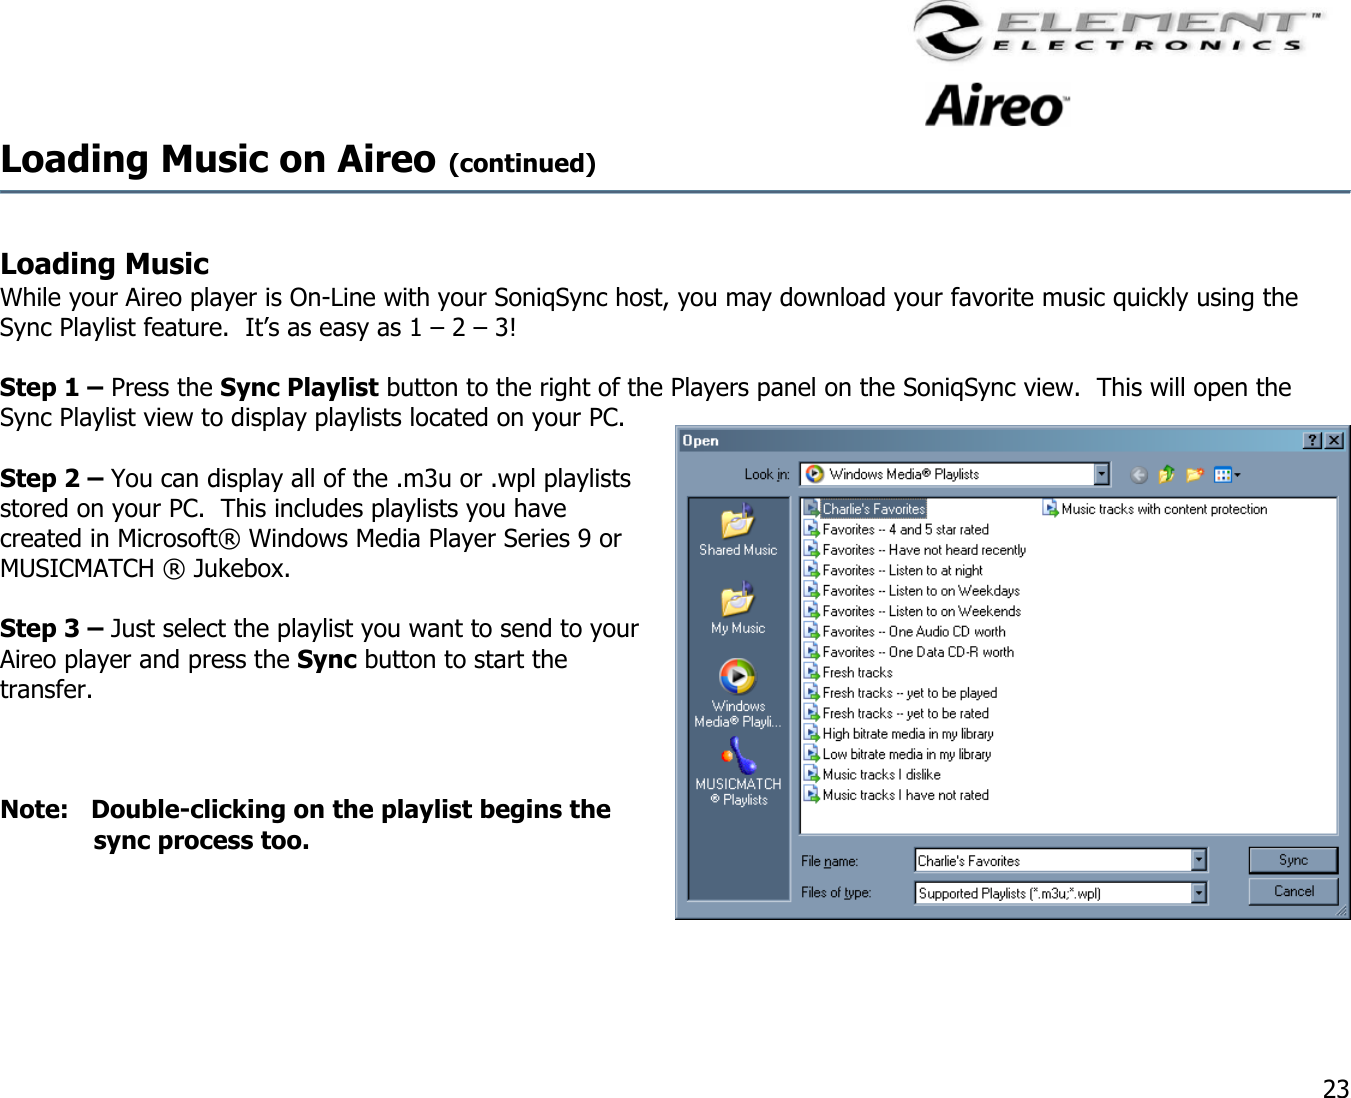                                                                                    23 Loading Music on Aireo (continued)   Loading Music While your Aireo player is On-Line with your SoniqSync host, you may download your favorite music quickly using the Sync Playlist feature.  It’s as easy as 1 – 2 – 3!  Step 1 – Press the Sync Playlist button to the right of the Players panel on the SoniqSync view.  This will open the Sync Playlist view to display playlists located on your PC.  Step 2 – You can display all of the .m3u or .wpl playlists stored on your PC.  This includes playlists you have created in Microsoft® Windows Media Player Series 9 or MUSICMATCH ® Jukebox.  Step 3 – Just select the playlist you want to send to your Aireo player and press the Sync button to start the transfer.    Note:   Double-clicking on the playlist begins the sync process too.     